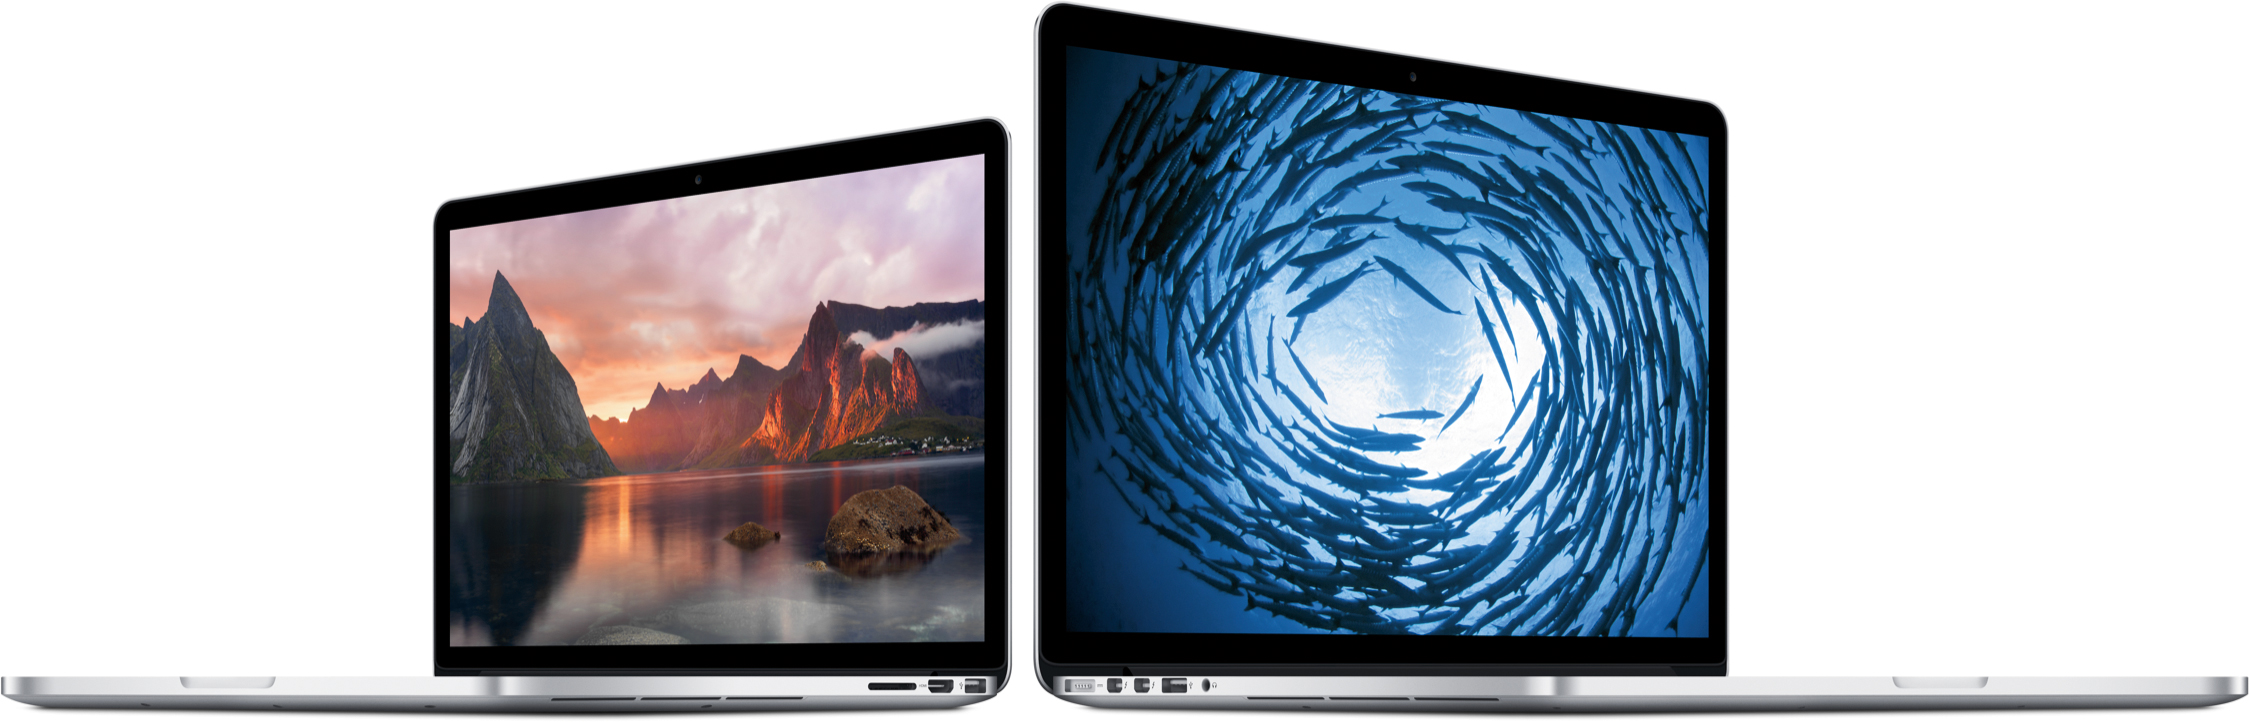 New MacBooks Pro with Retina display side by side